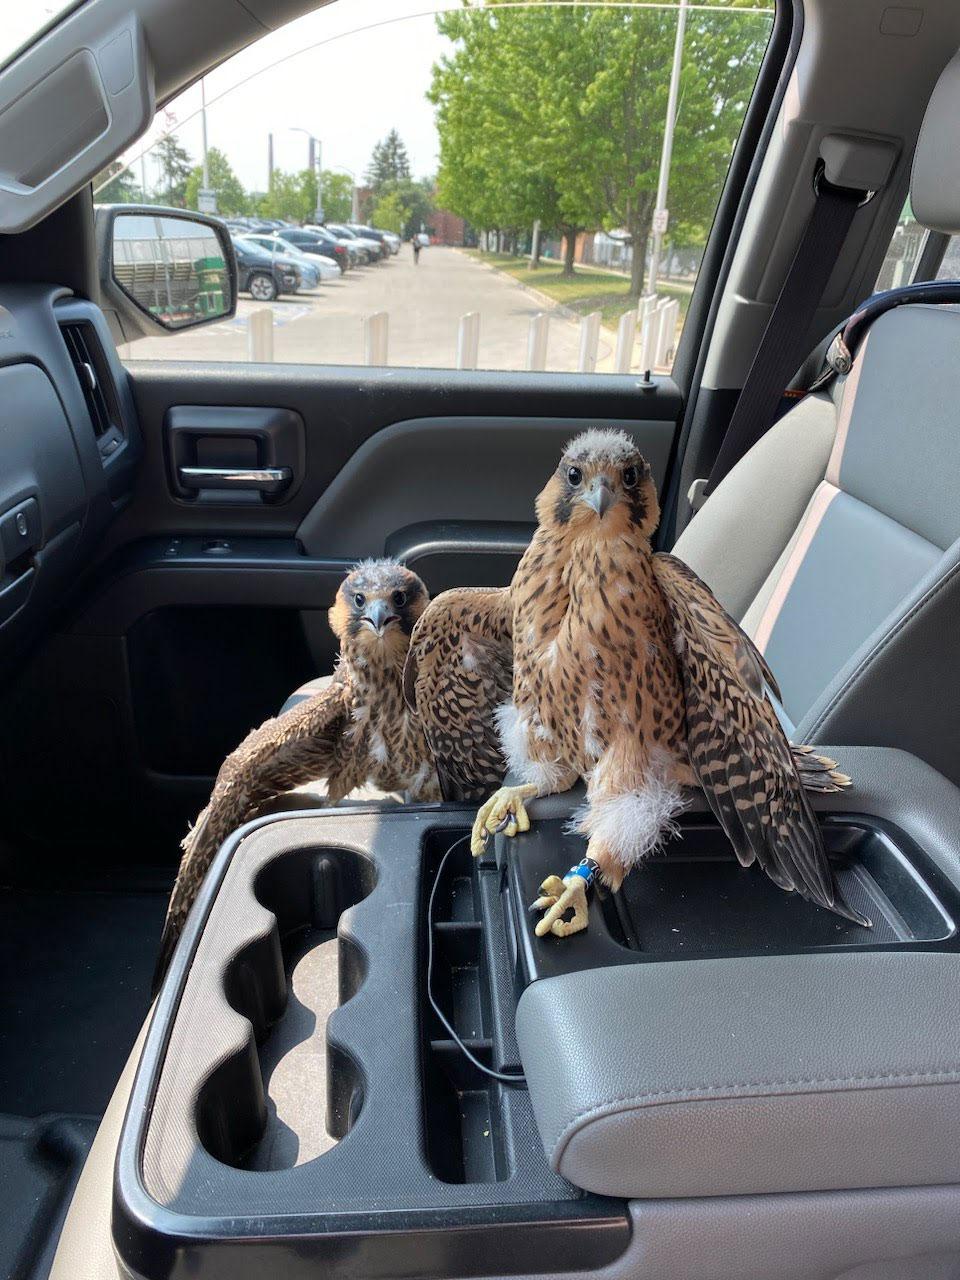 Two peregrine falcon youths sit in the passenger seat of an IPF fleet truck